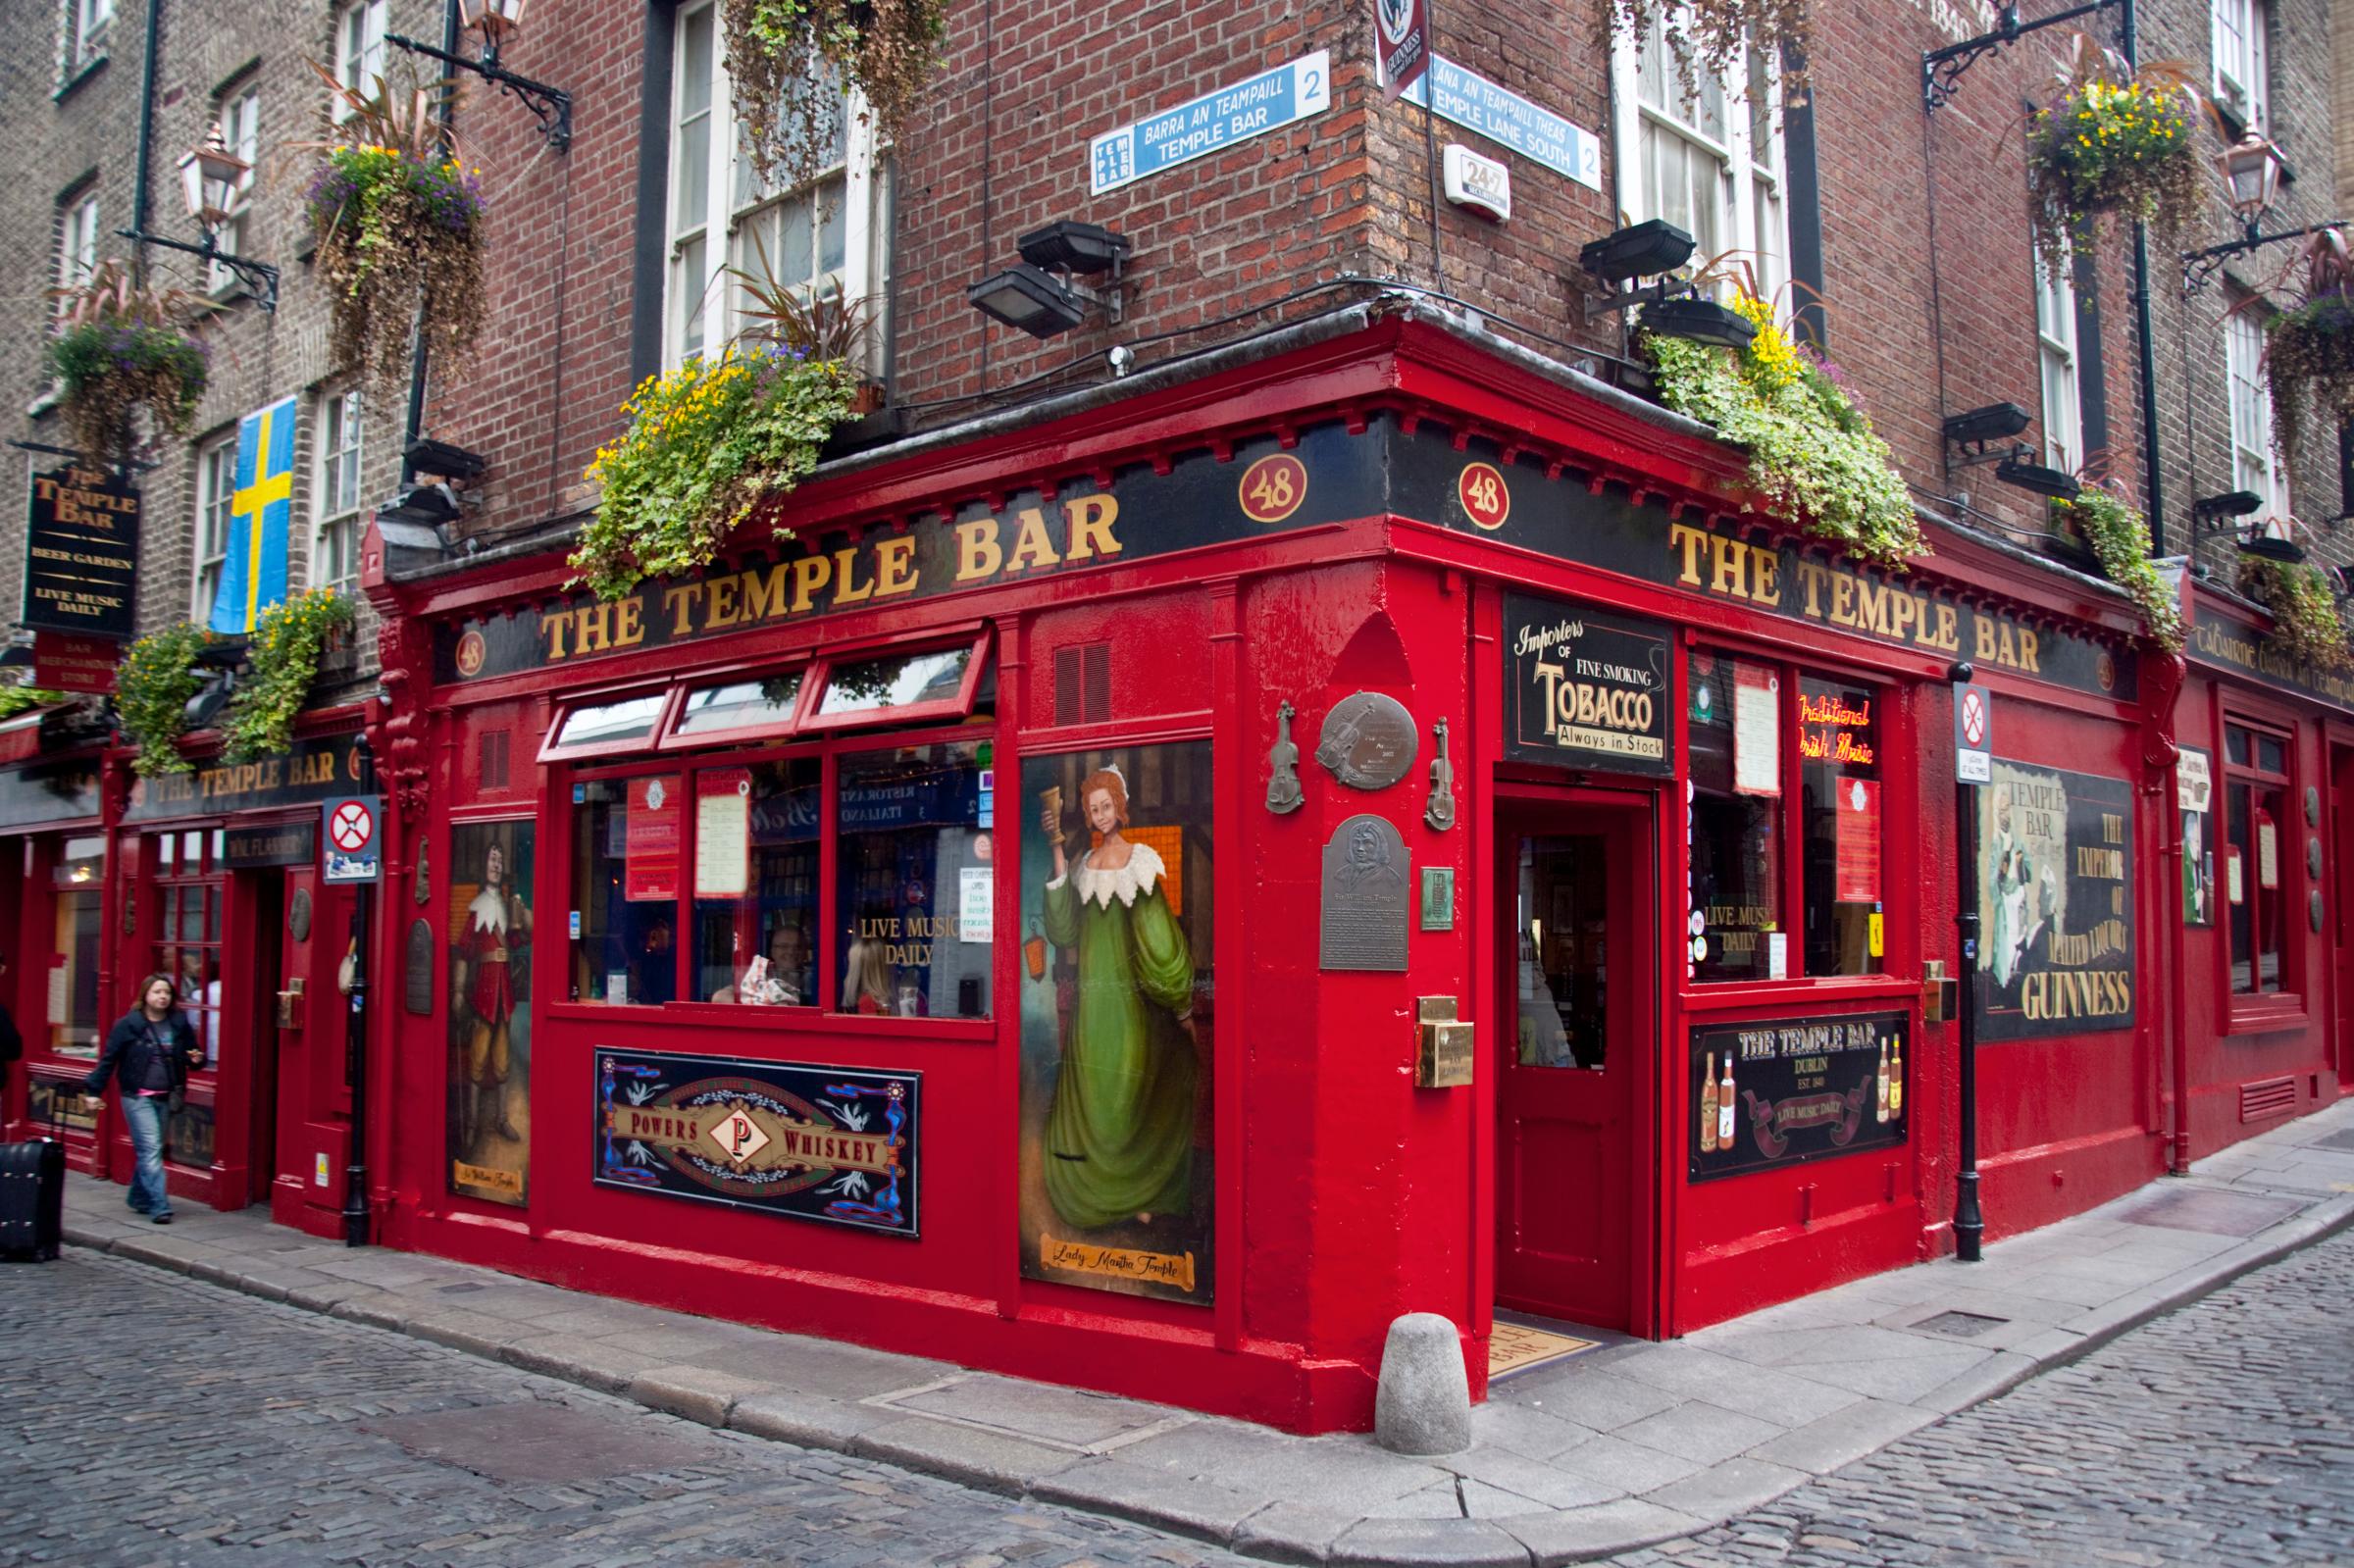 The Temple Bar in the district of Temple Bar, on the south bank of the River Liffey in central Dublin, Ireland